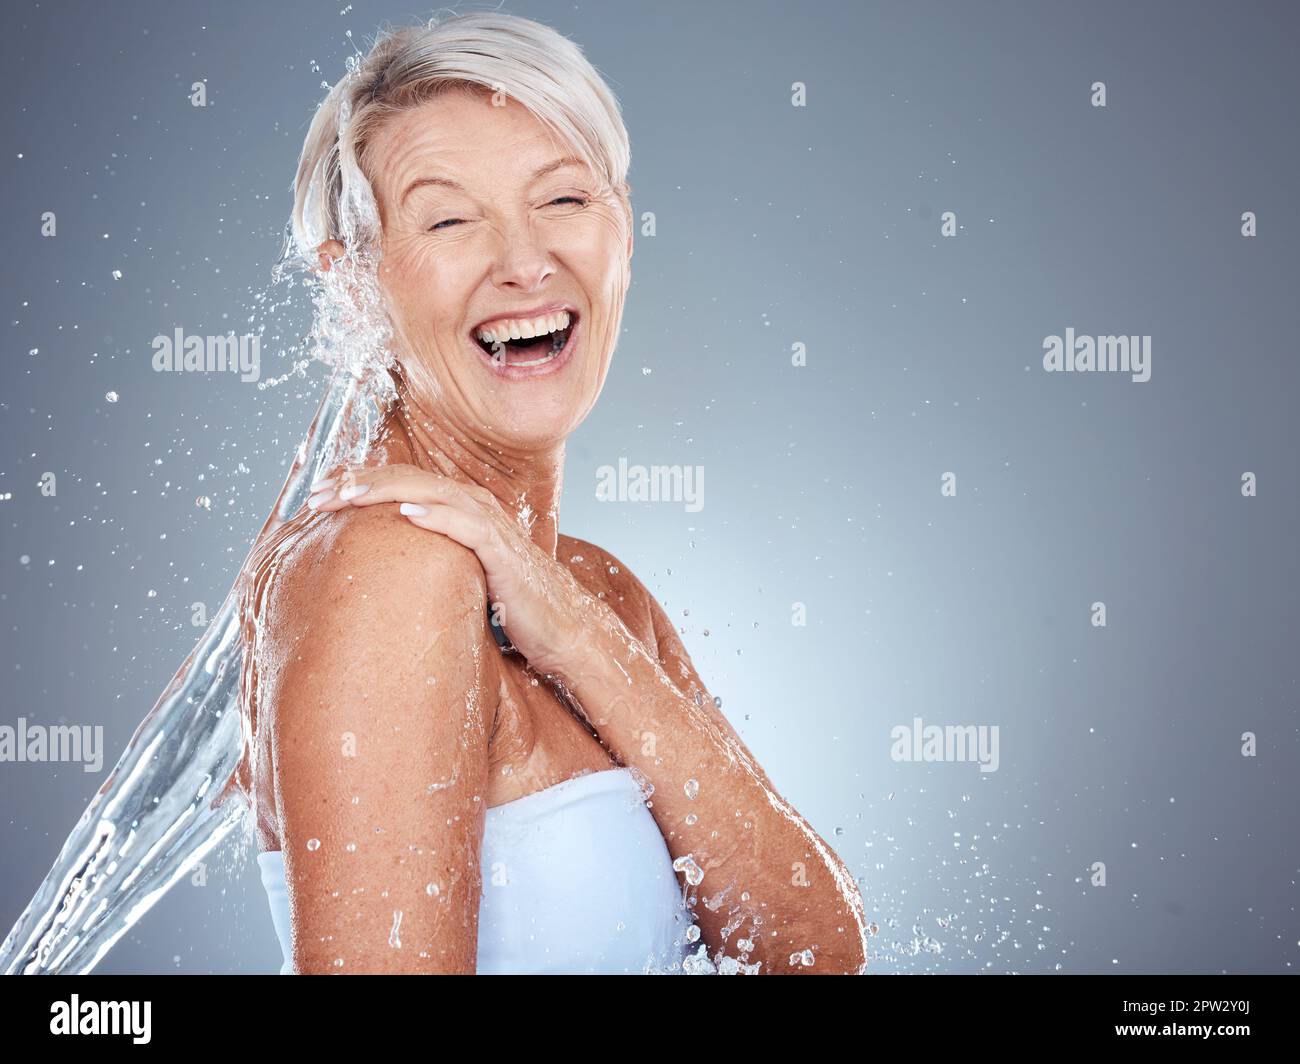 Beauty, senior and cleaning body with water splash for skincare, washing and hygiene routine. Happy, health and natural body care of mature woman mode Stock Photo